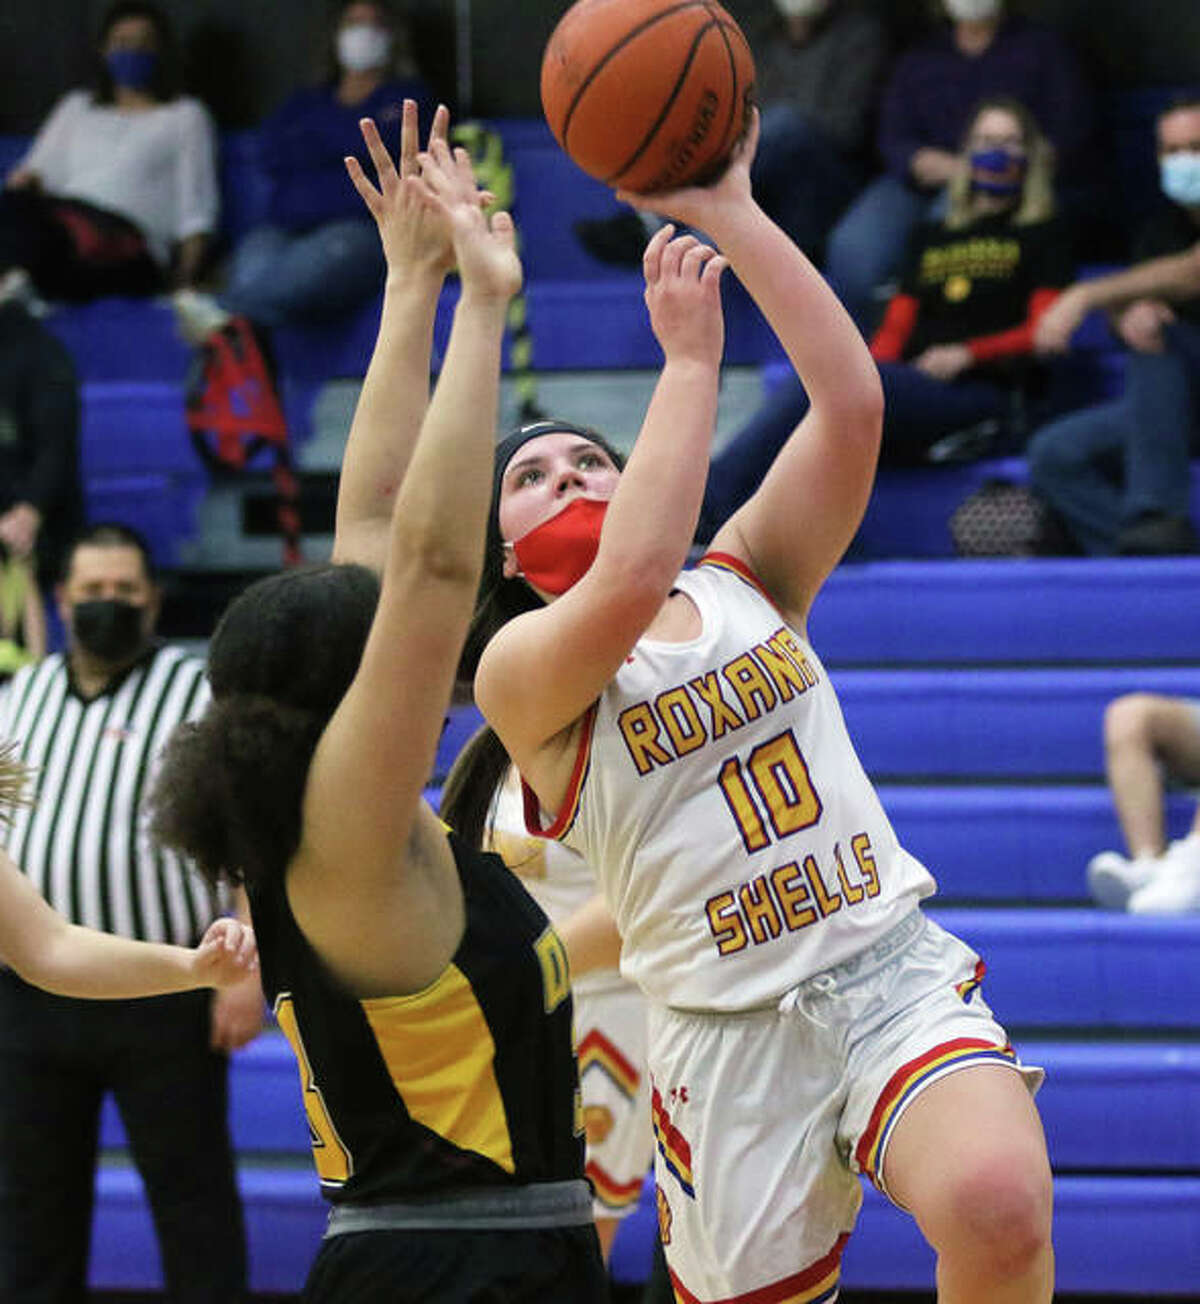 Roxana freshman Kinsely Mouser (10) scores over EA-WR freshman Emily Johnson for two of her 10 points in the second quarter Thursday night in Roxana.